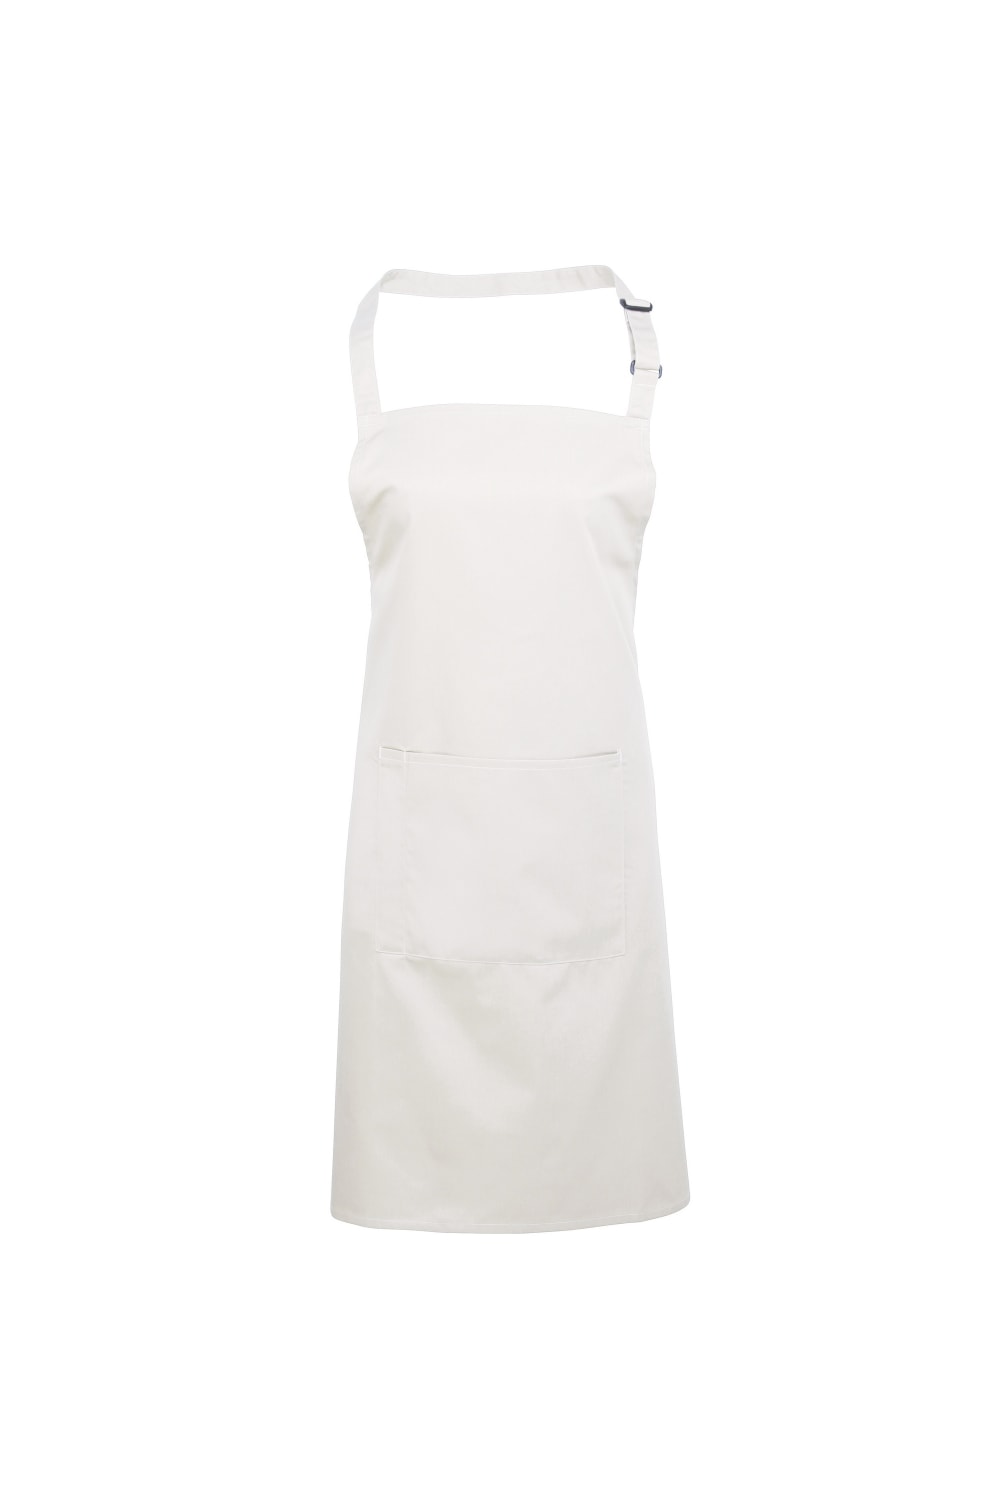 Ladies/Womens Colours Bip Apron With Pocket / Workwear (Pack Of 2) (White) (One Size)